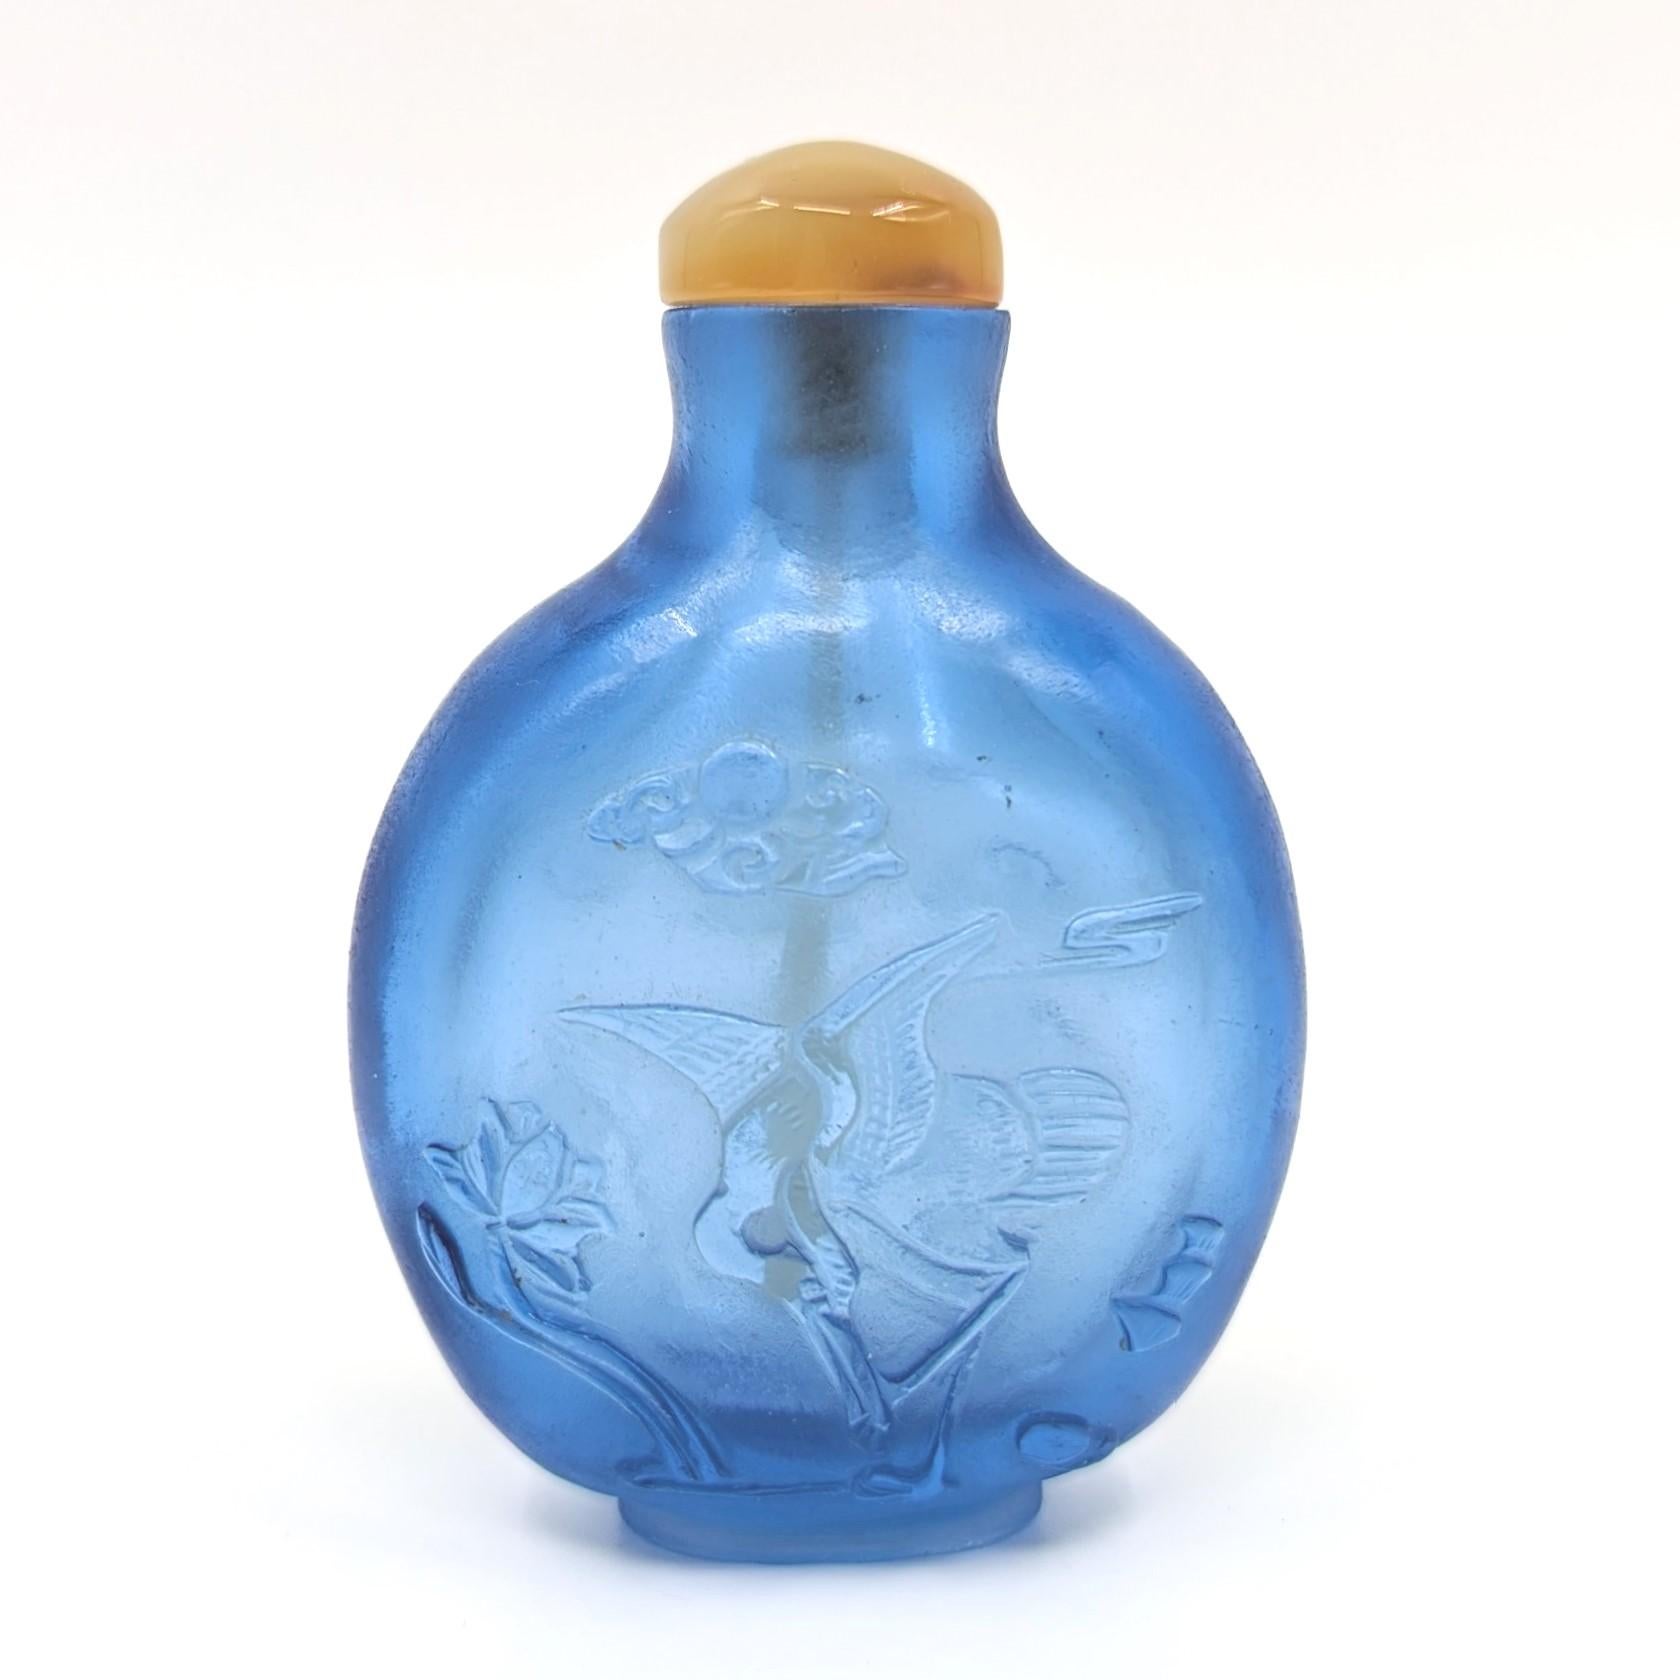 Antique Chinese light aqua cobalt blue glass snuff bottle, finely carved in relief with cranes in flight among clouds to one side, and a resting crane among lotus blooms to verso, raised on a well carved foot ring, agate stopper

19th Century, Late